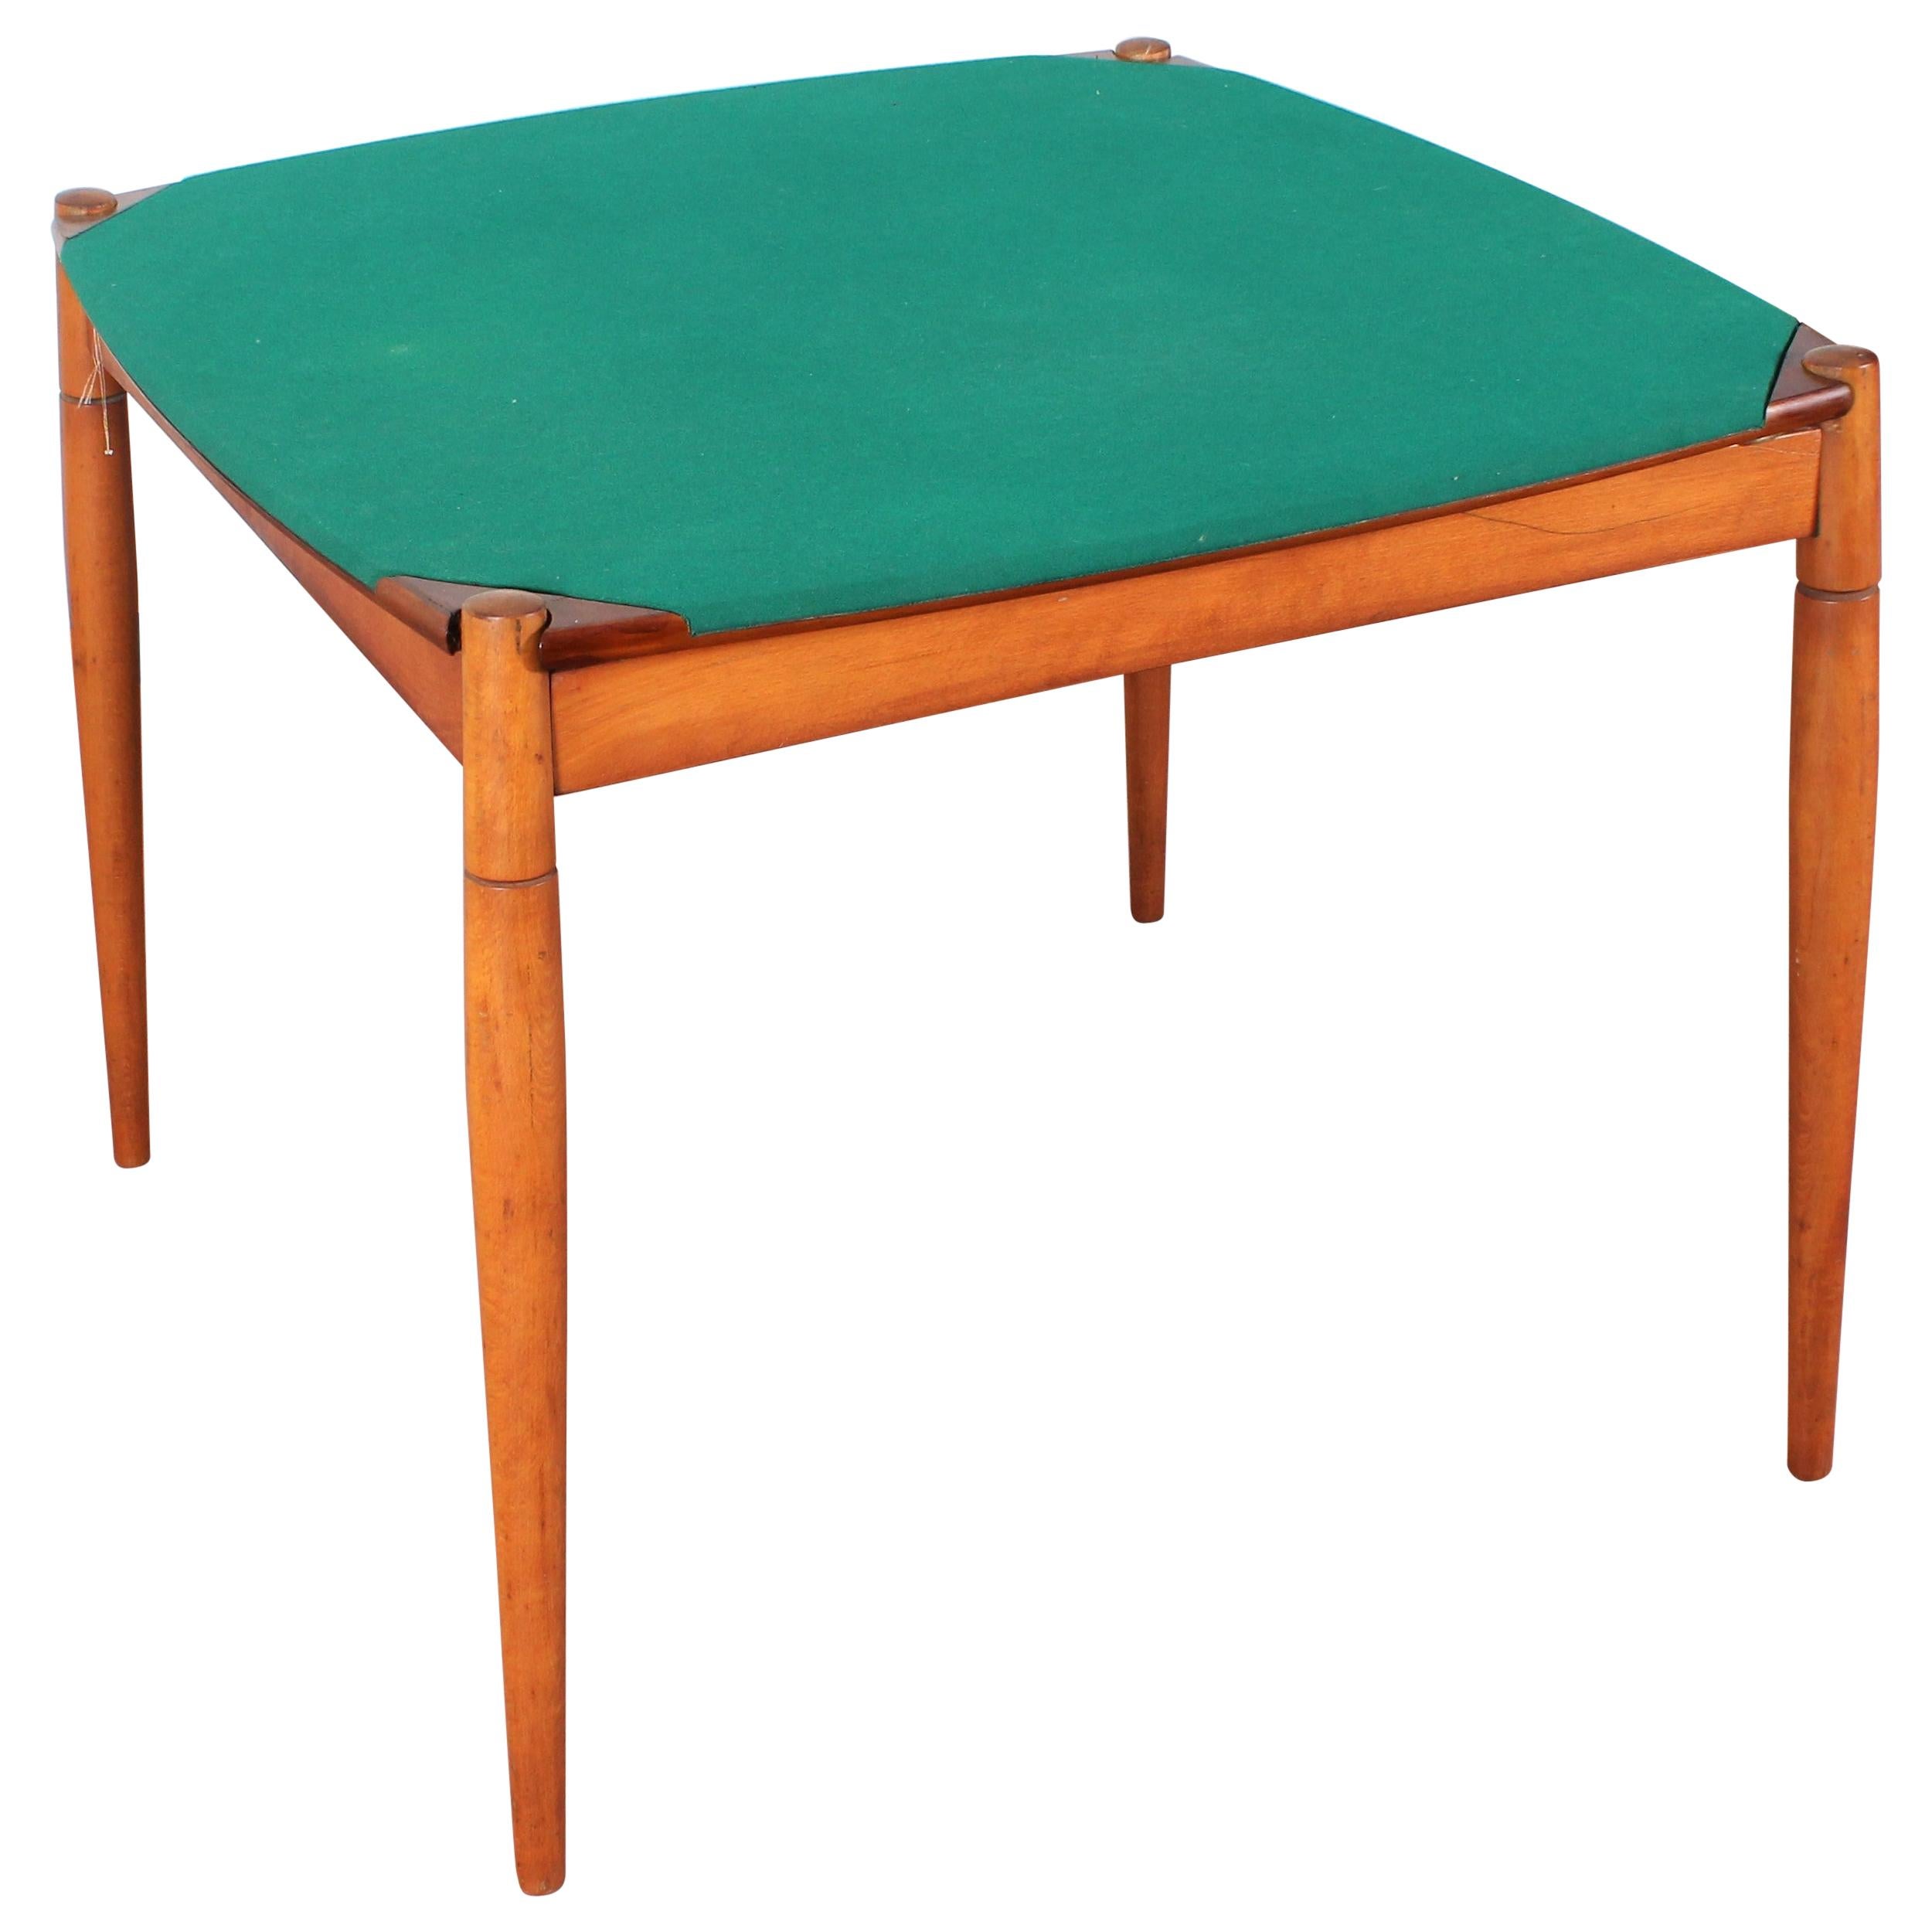 Gio Ponti for Reguitti Square Tilting Wood Poker Table, Italy, 1958